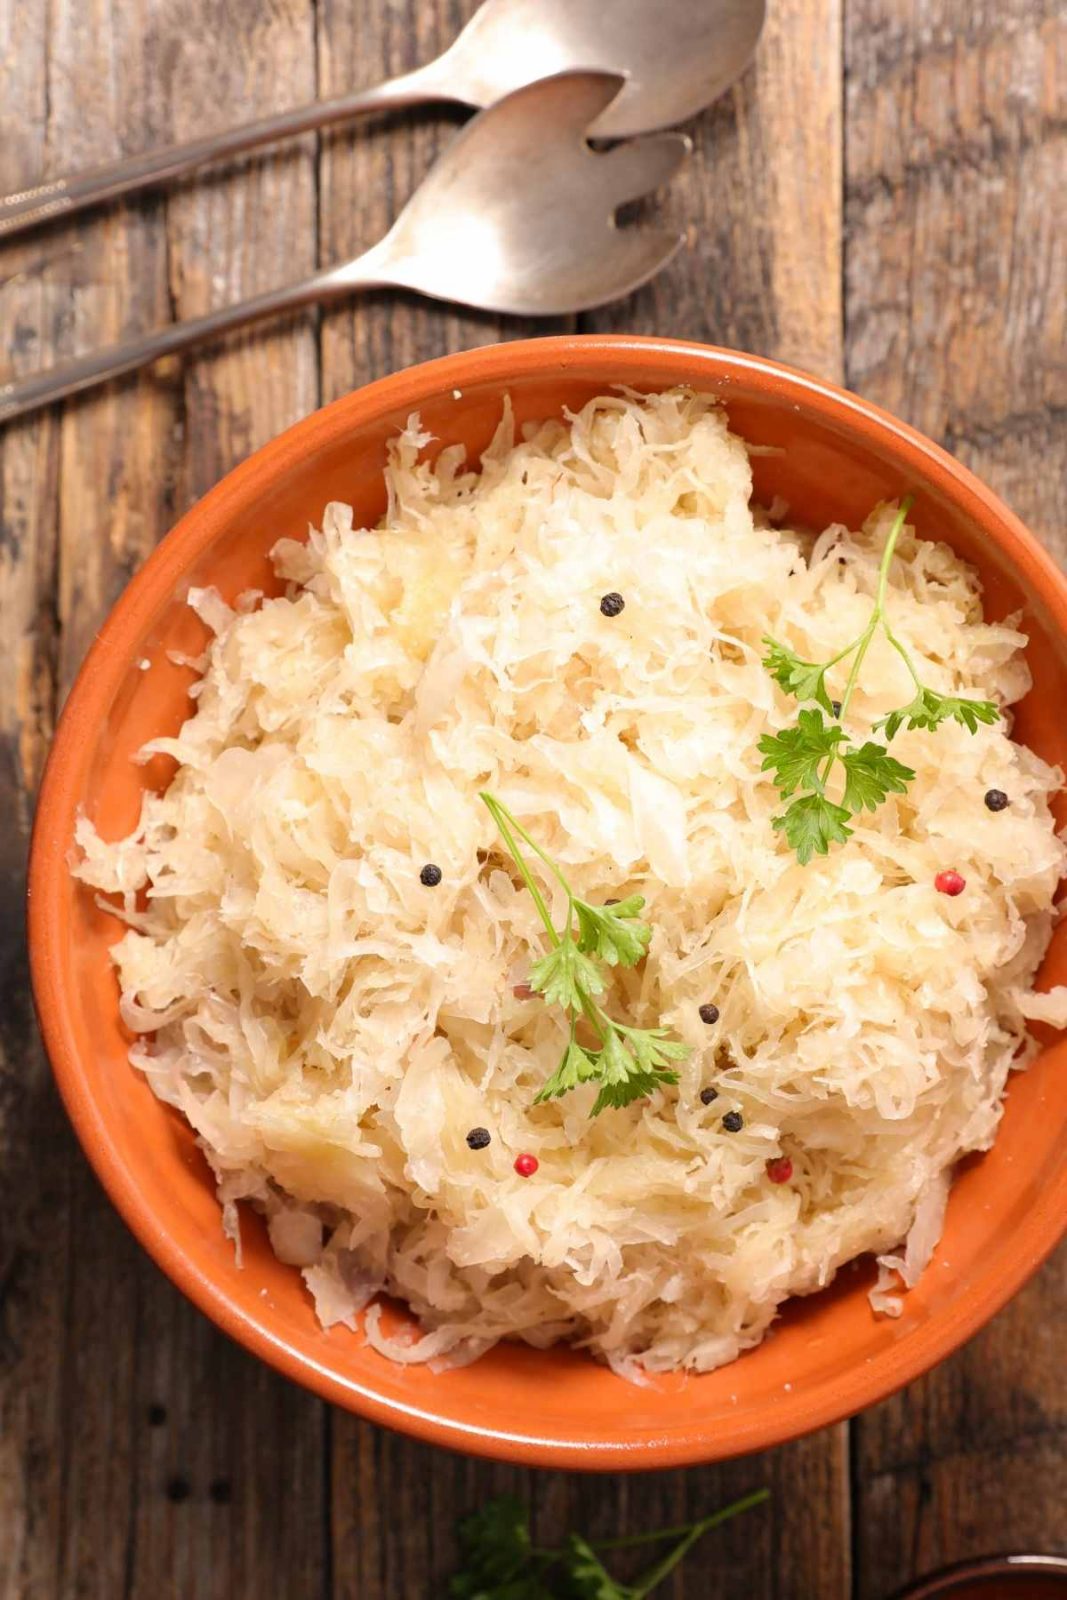 Want to extend the shelf life of sauerkraut? You’ll be happy to know that they freeze well. In this post, you’ll learn everything about how to freeze sauerkraut properly and how to cook frozen sauerkraut.